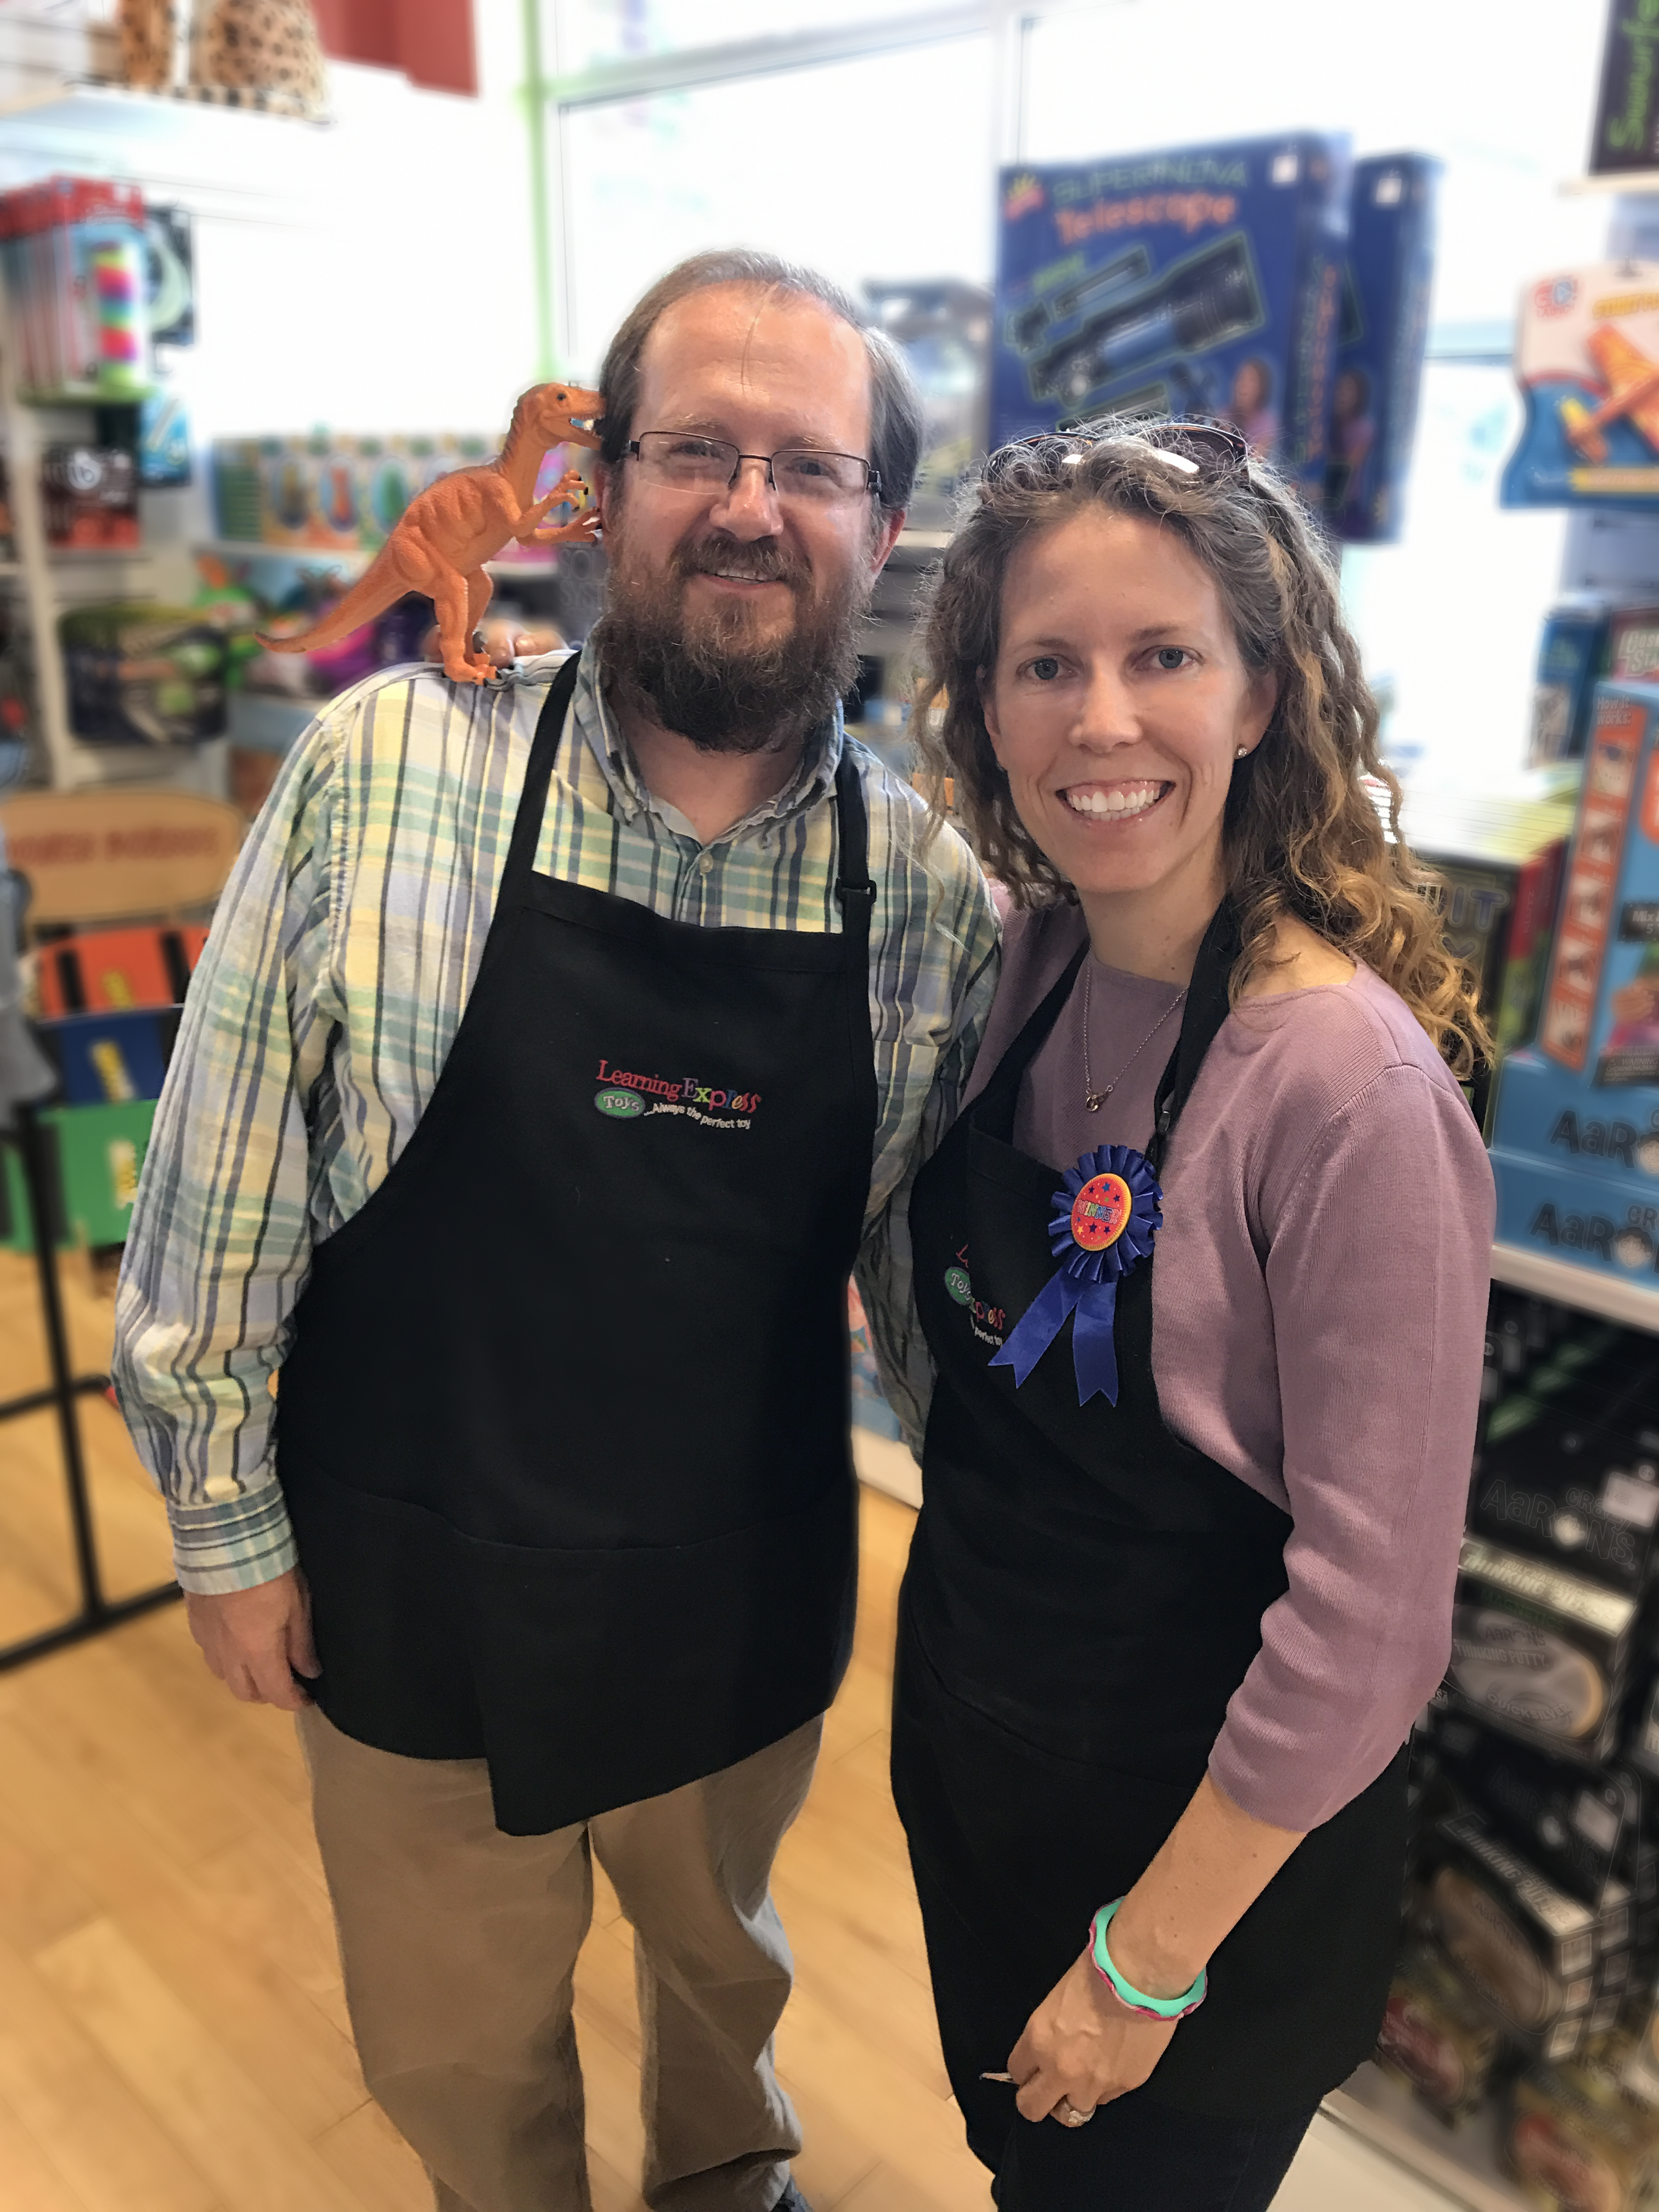 Patrick and Joanna Holland learning express toy store owners